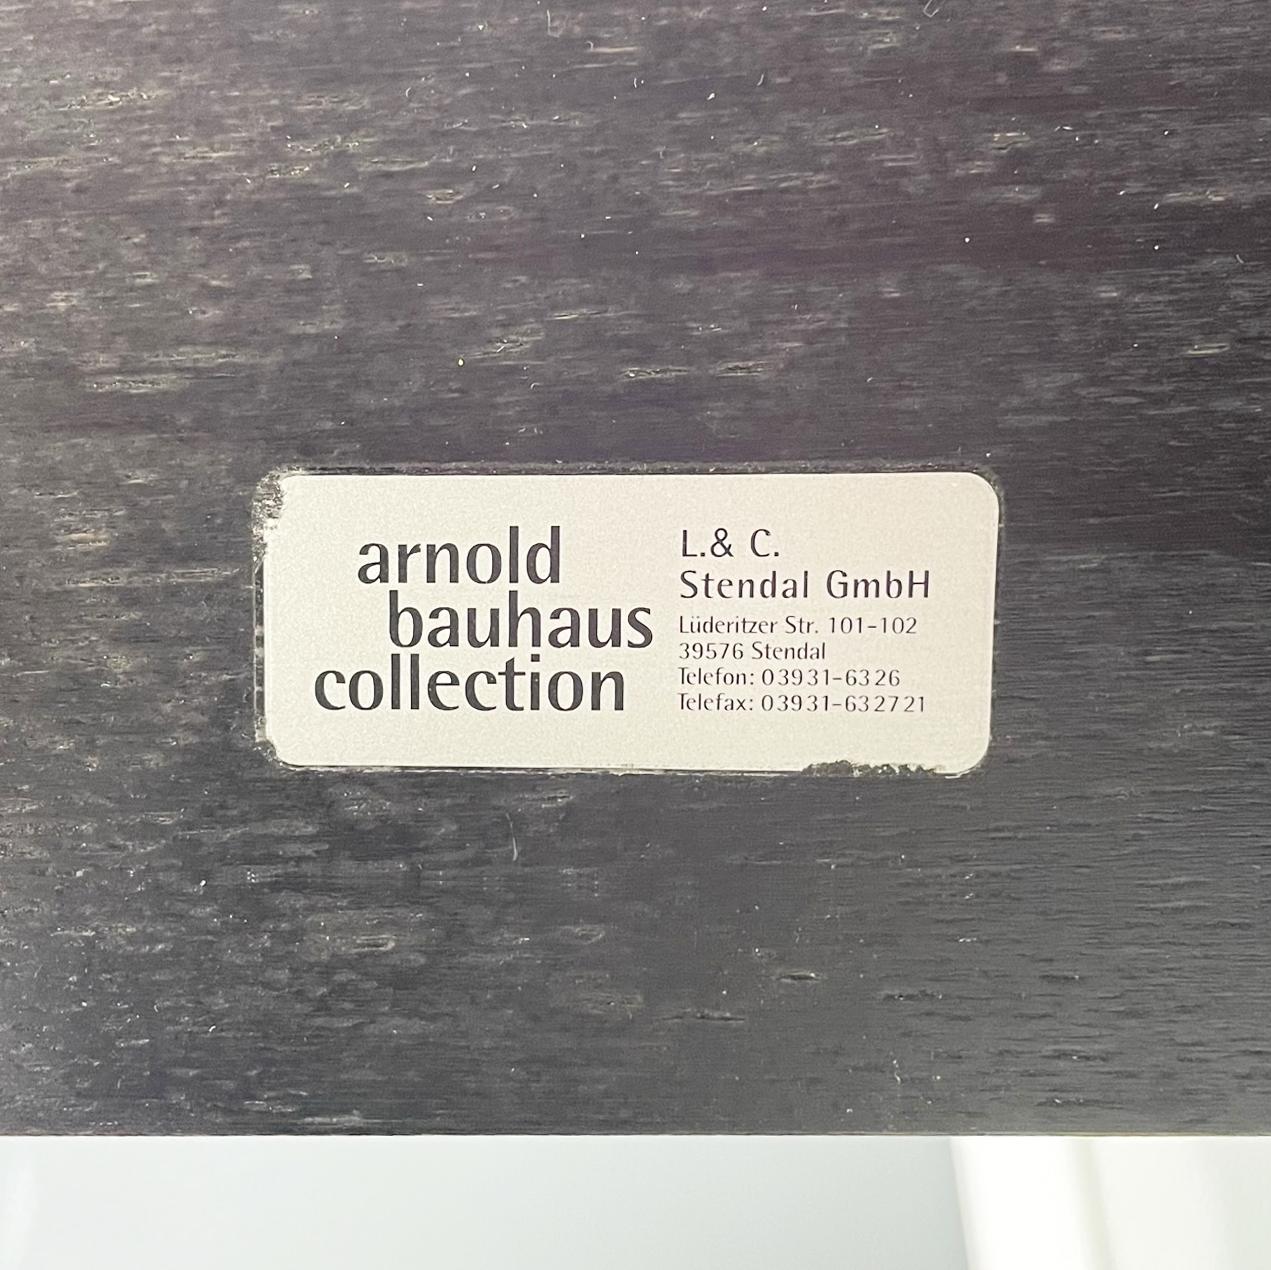 German Black Wood and Steel Coffee Tables by Arnold Bauhaus Collection, 1980s For Sale 7